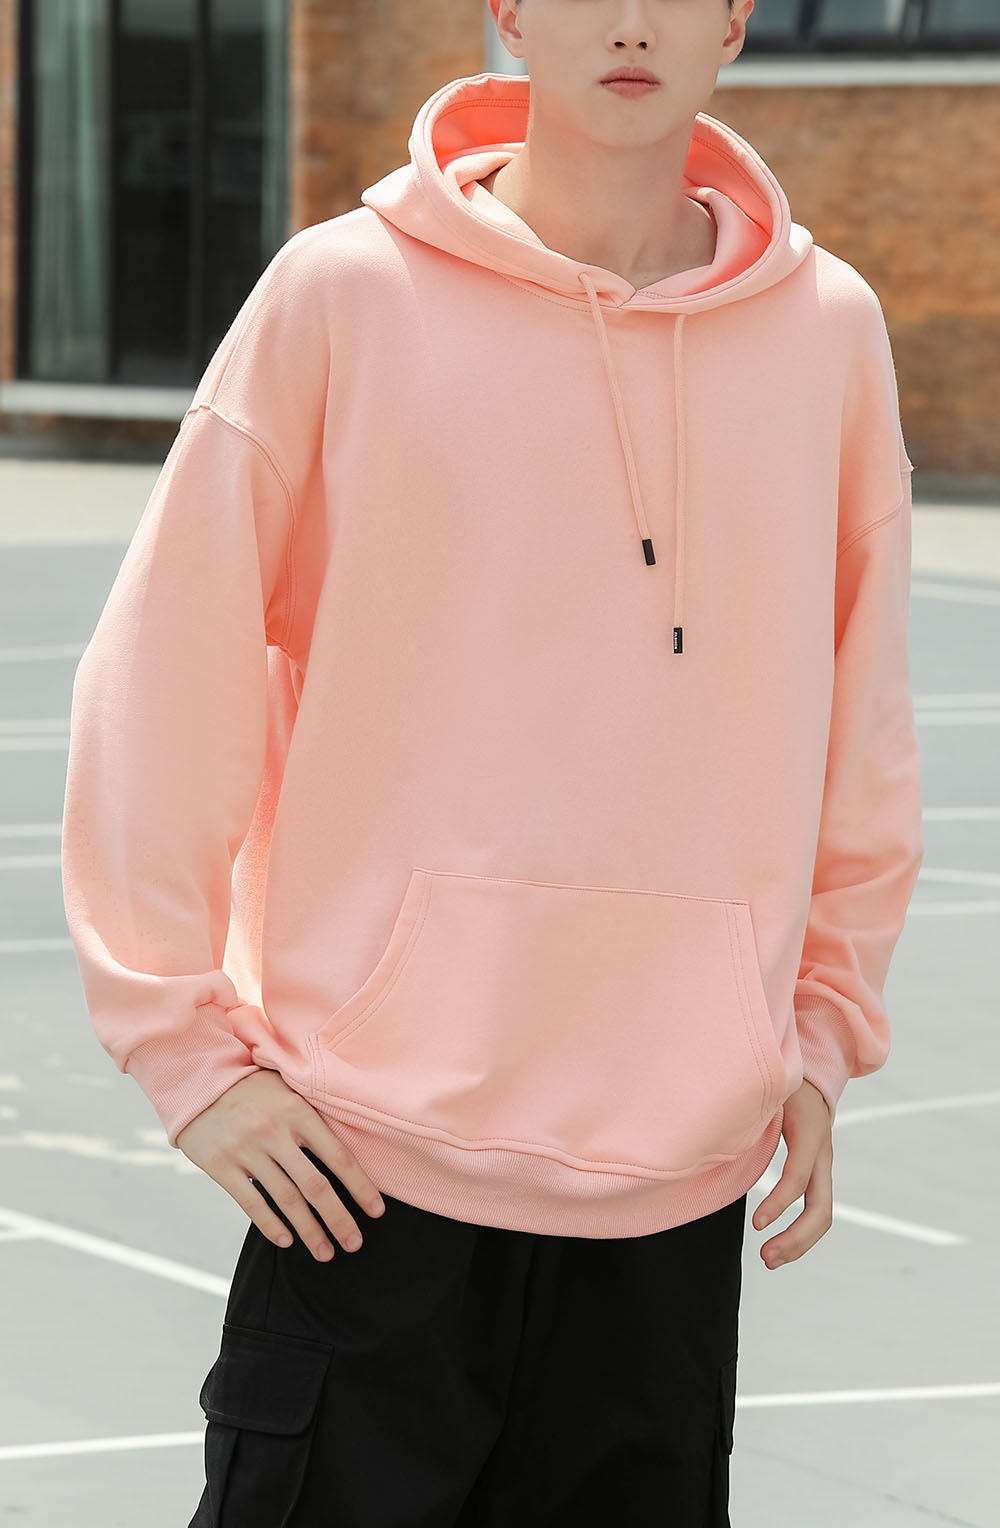 360GSM 100%Cotton Oversized Heavy Hoodies Mens Double Layer